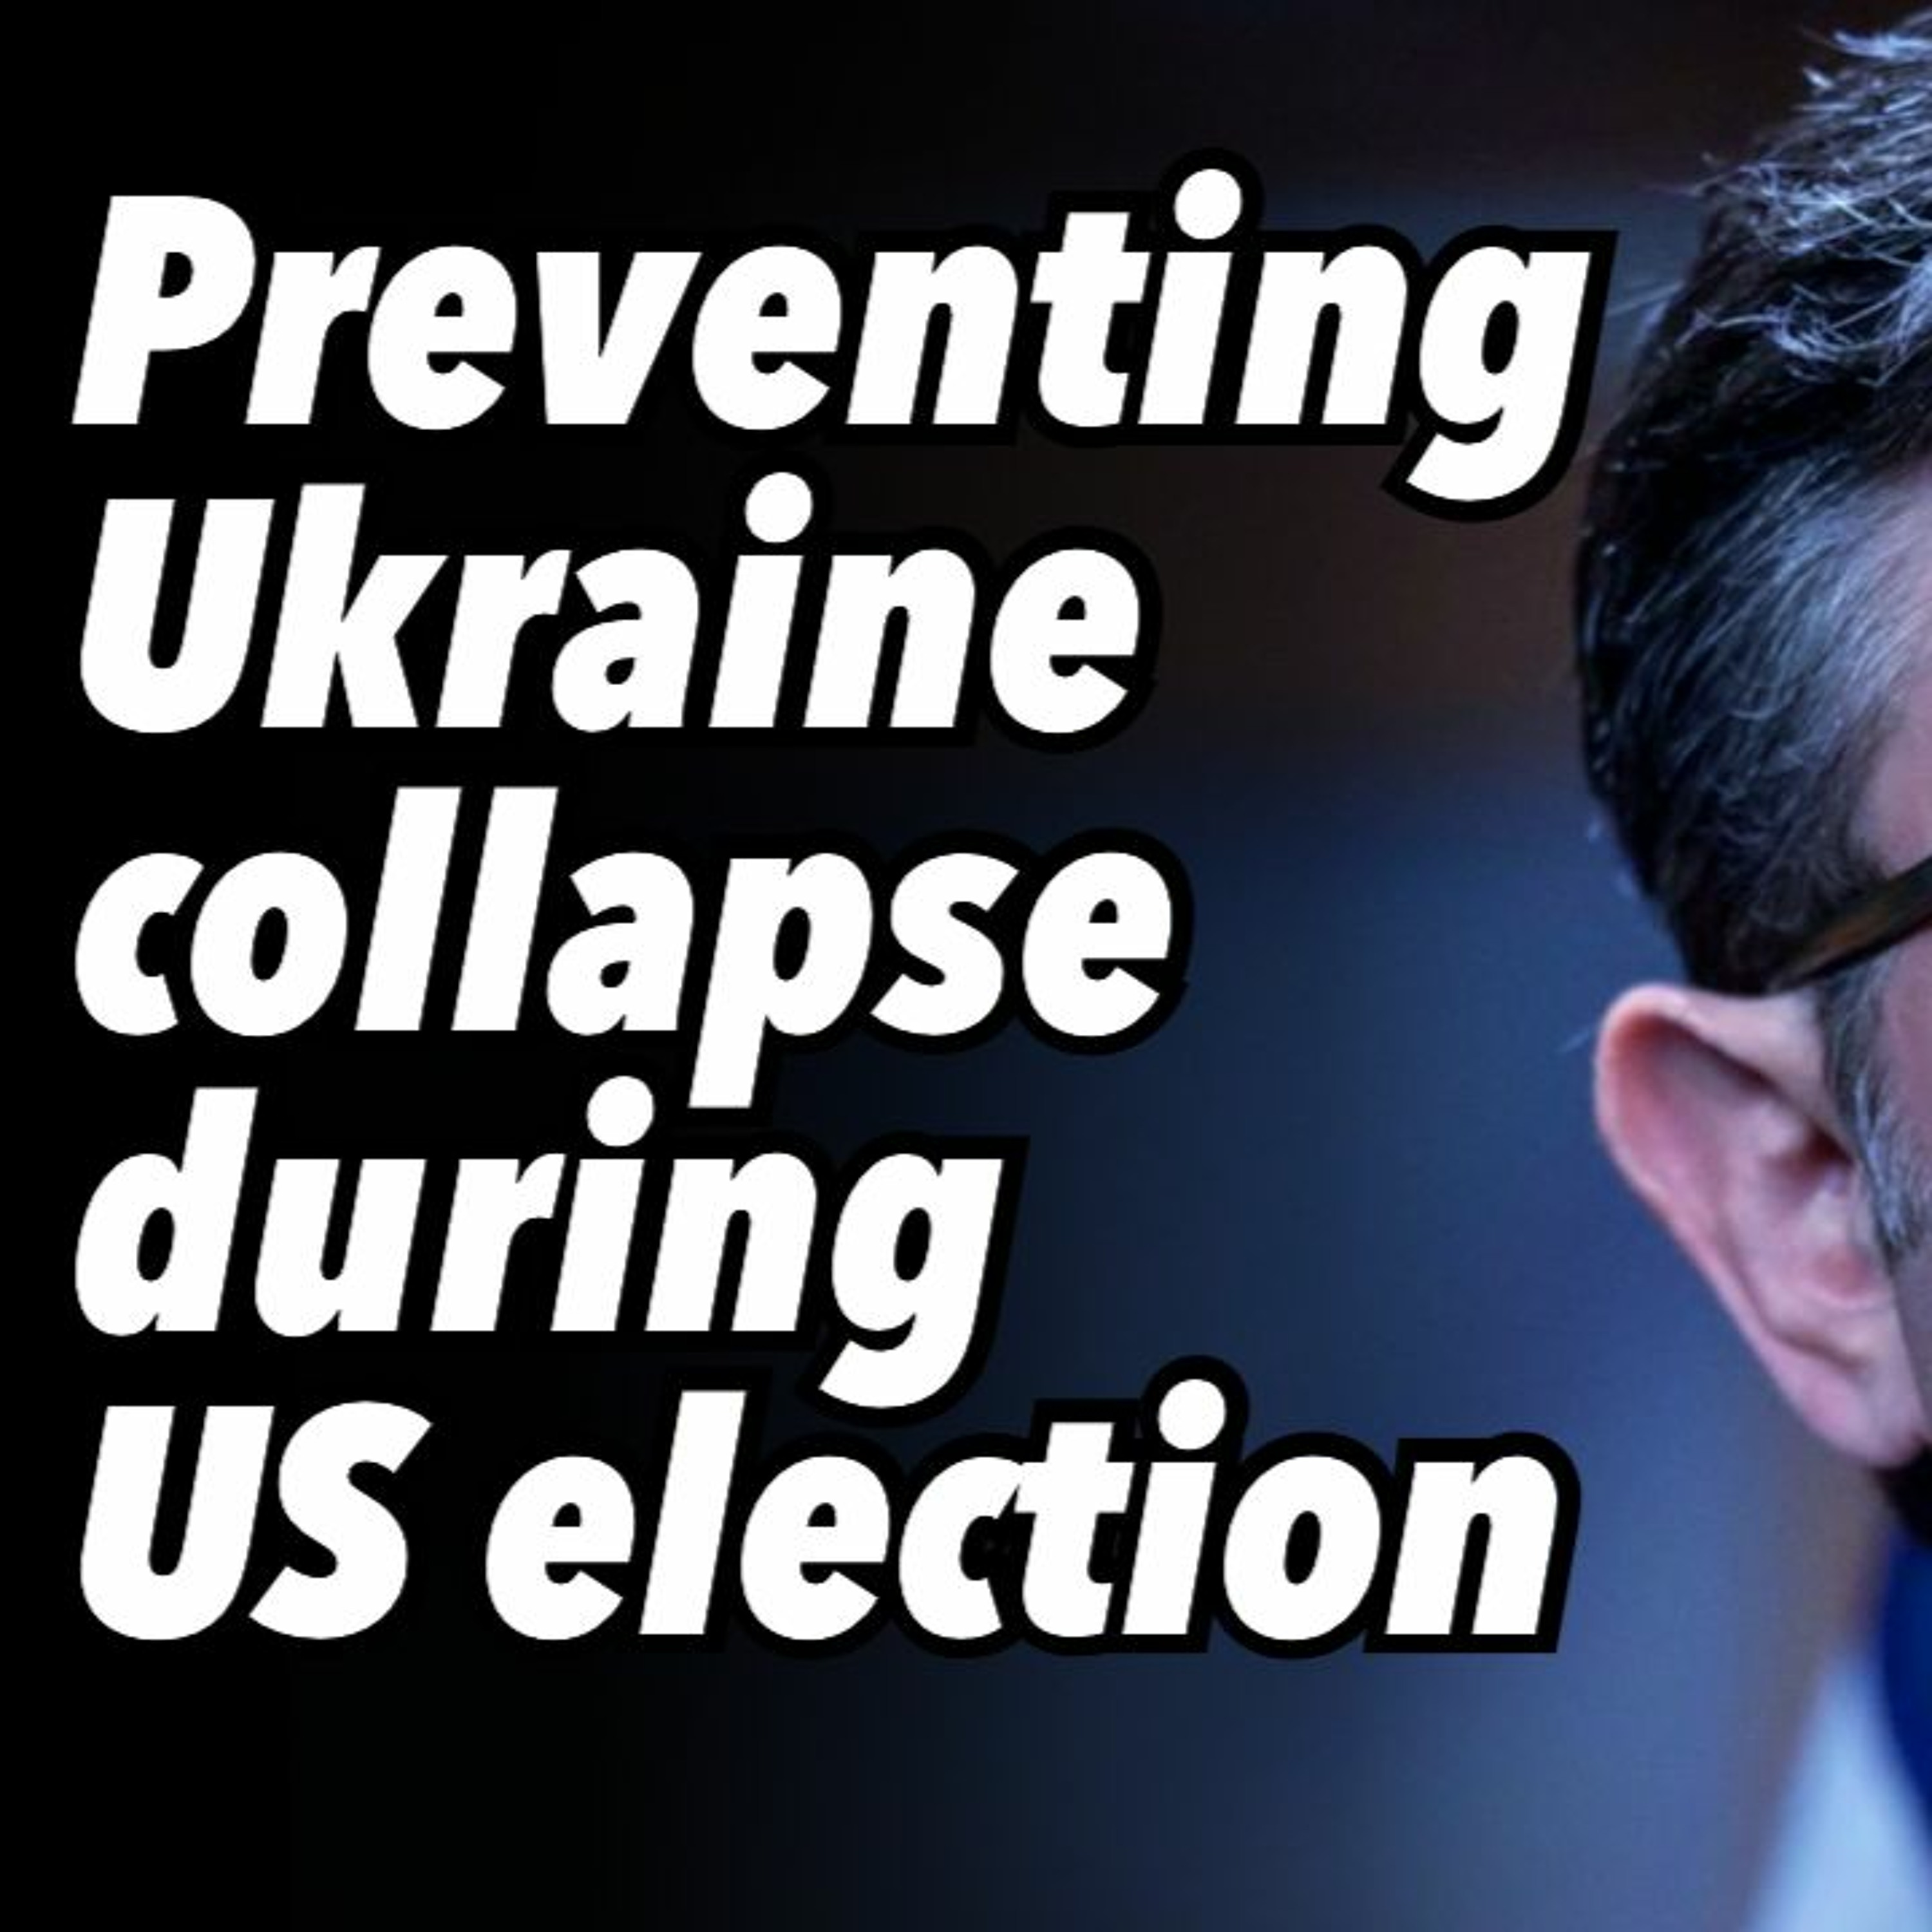 Preventing Ukraine collapse during US election